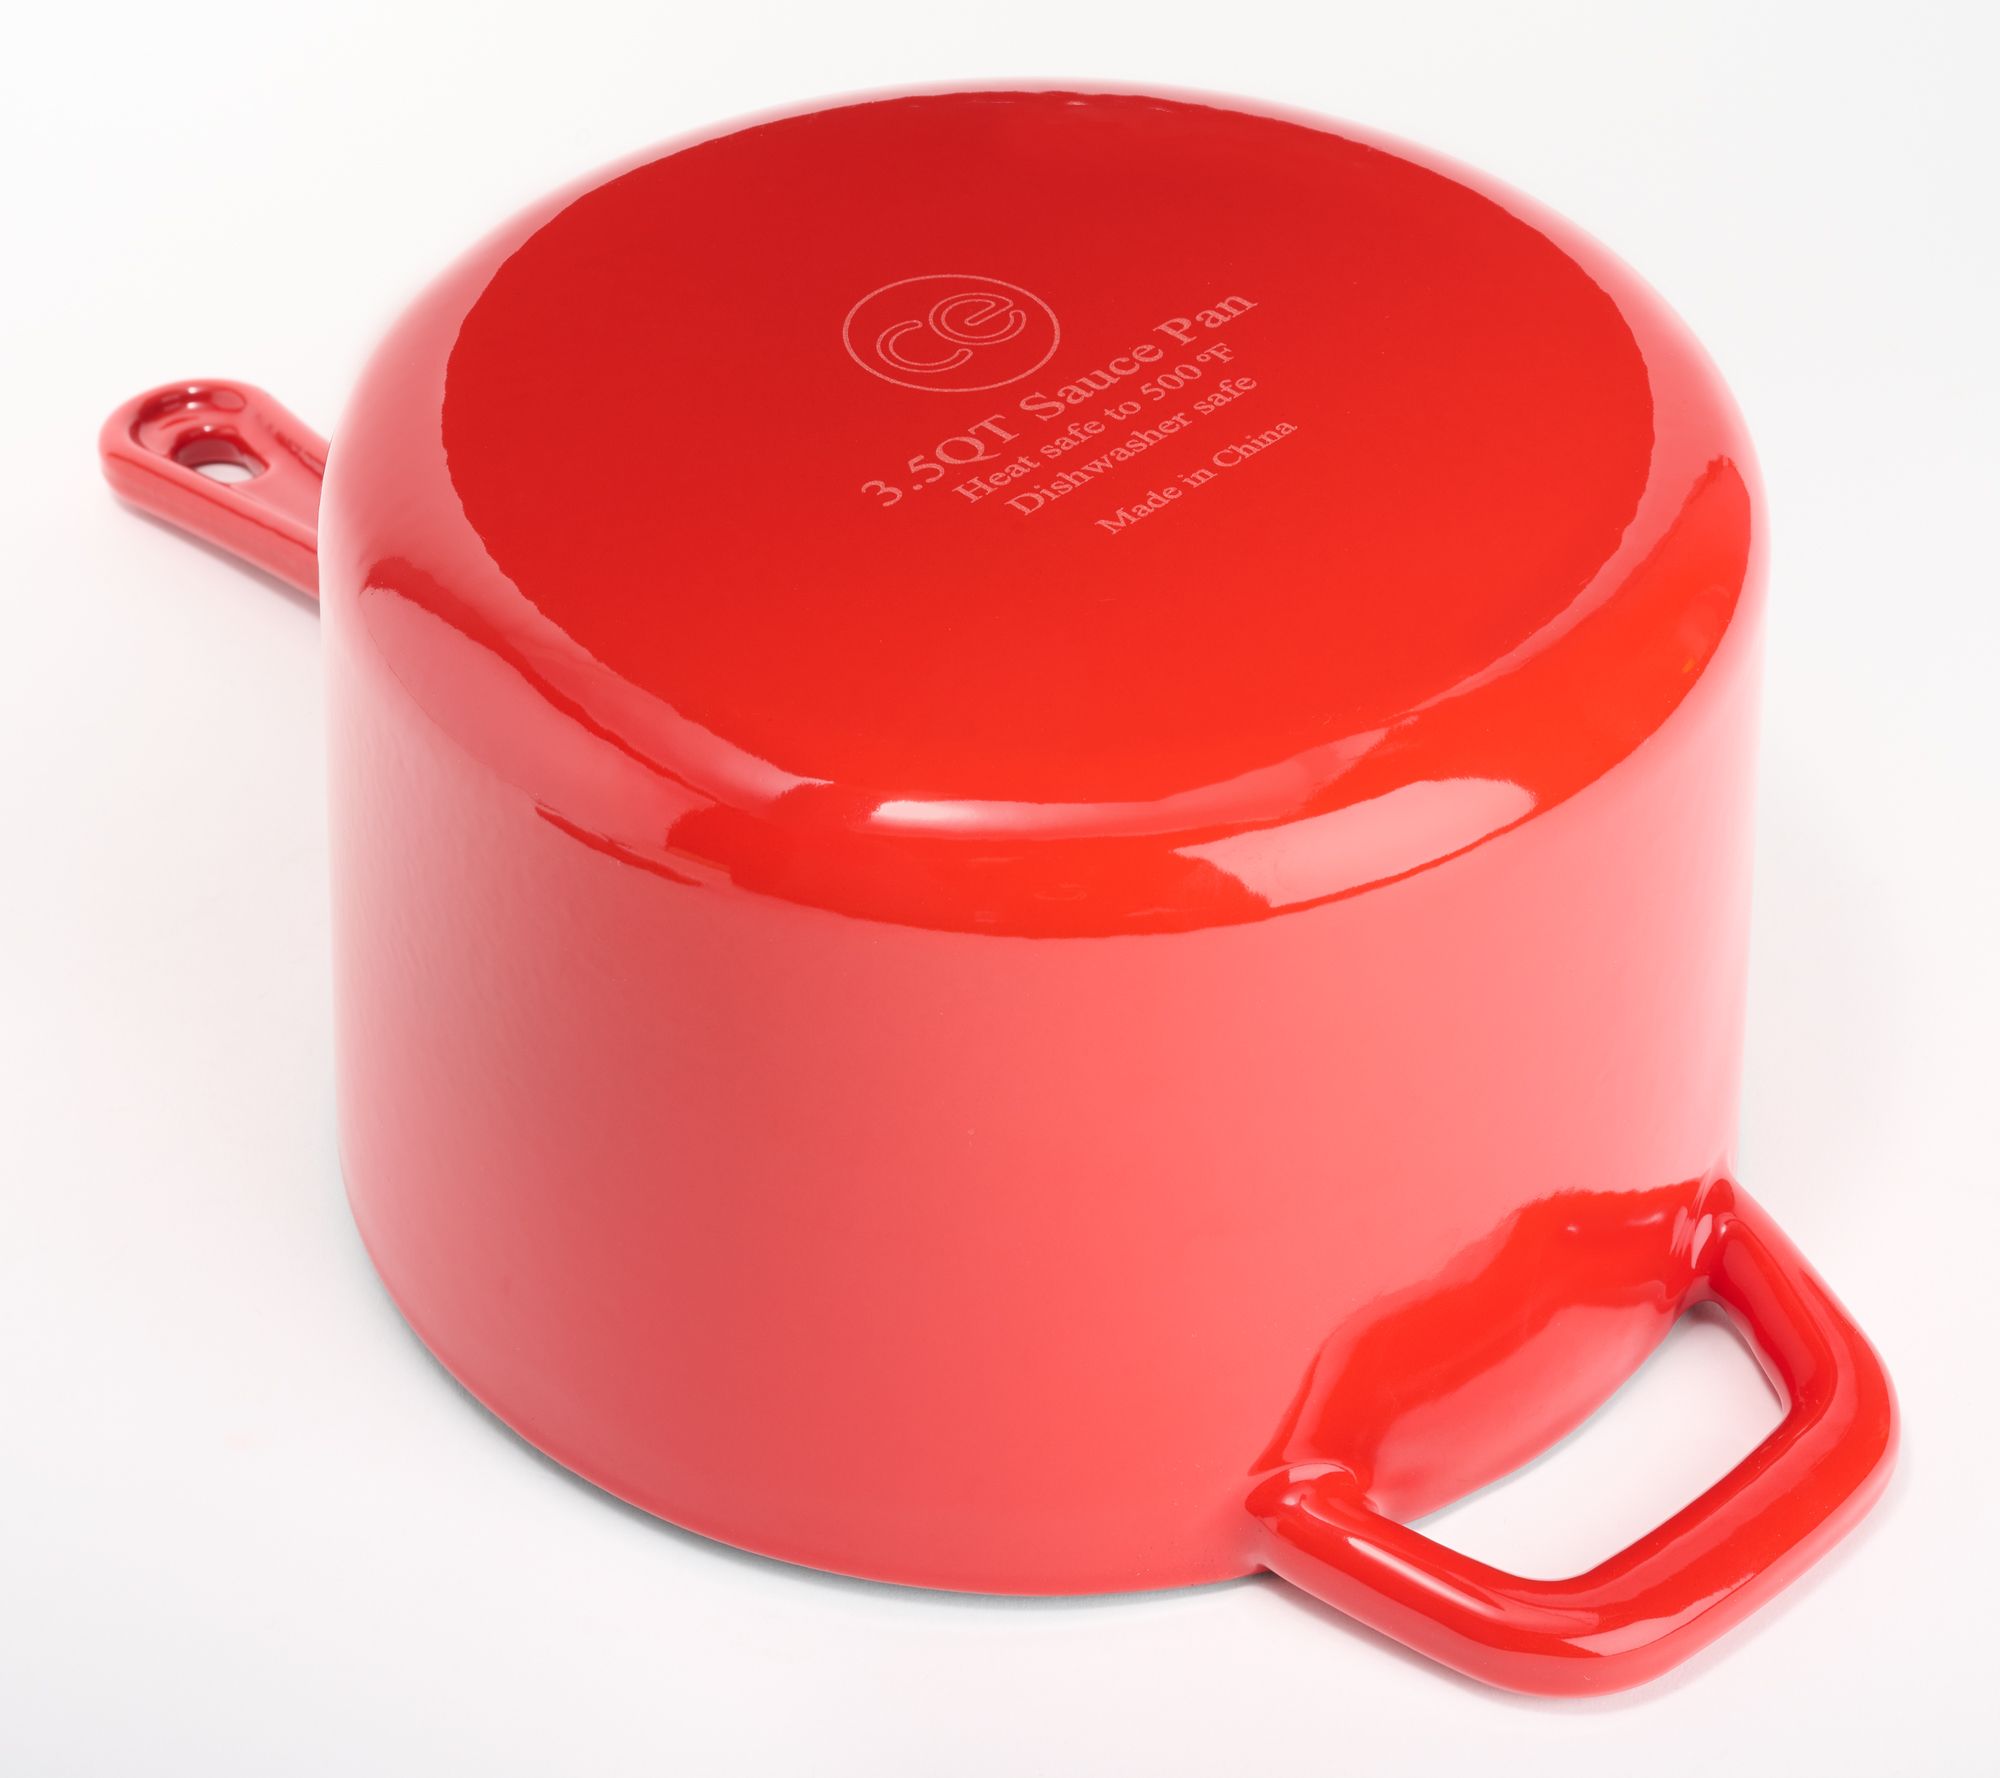 Cook's Essentials 3.5-qt Covered Cast Iron Sauce Pan